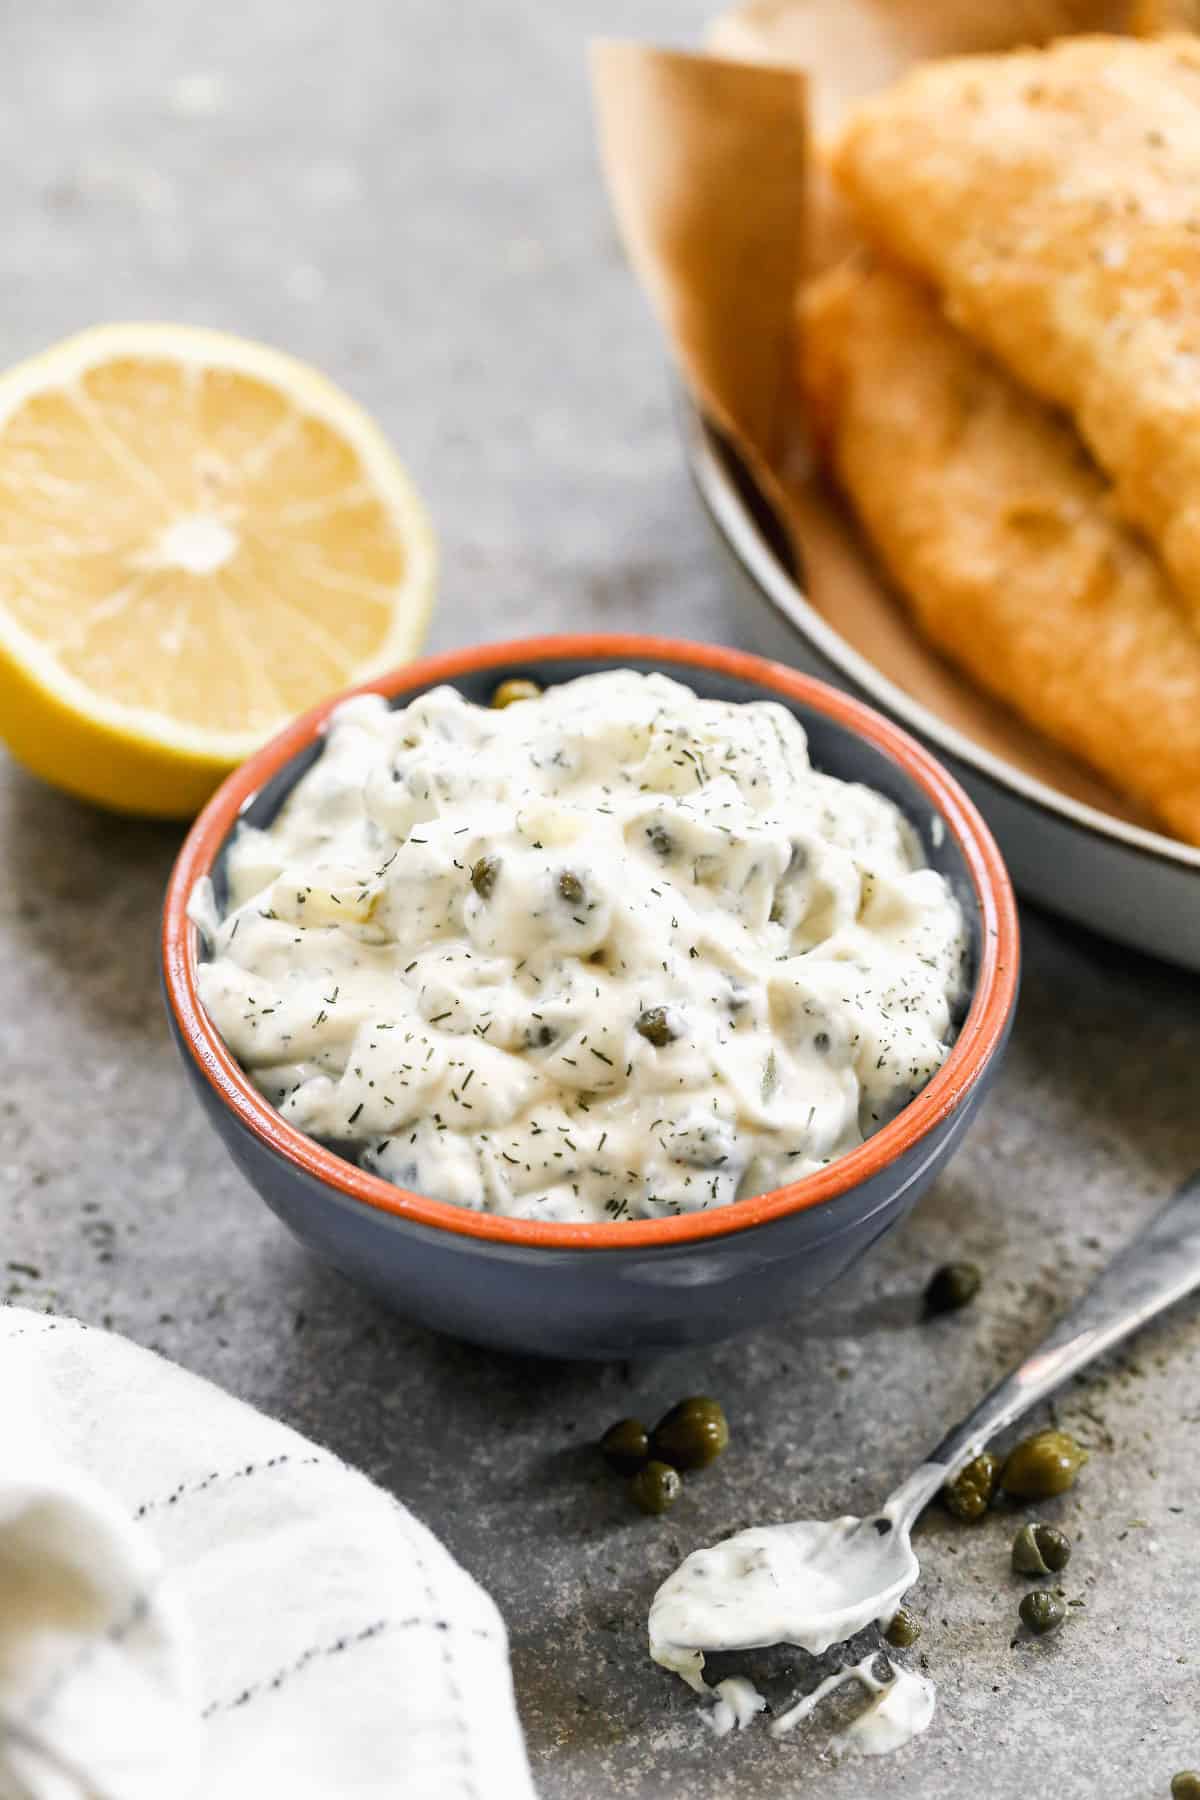 This homemade Tartar Sauce recipe in a small bowl with fish and chips in the background.